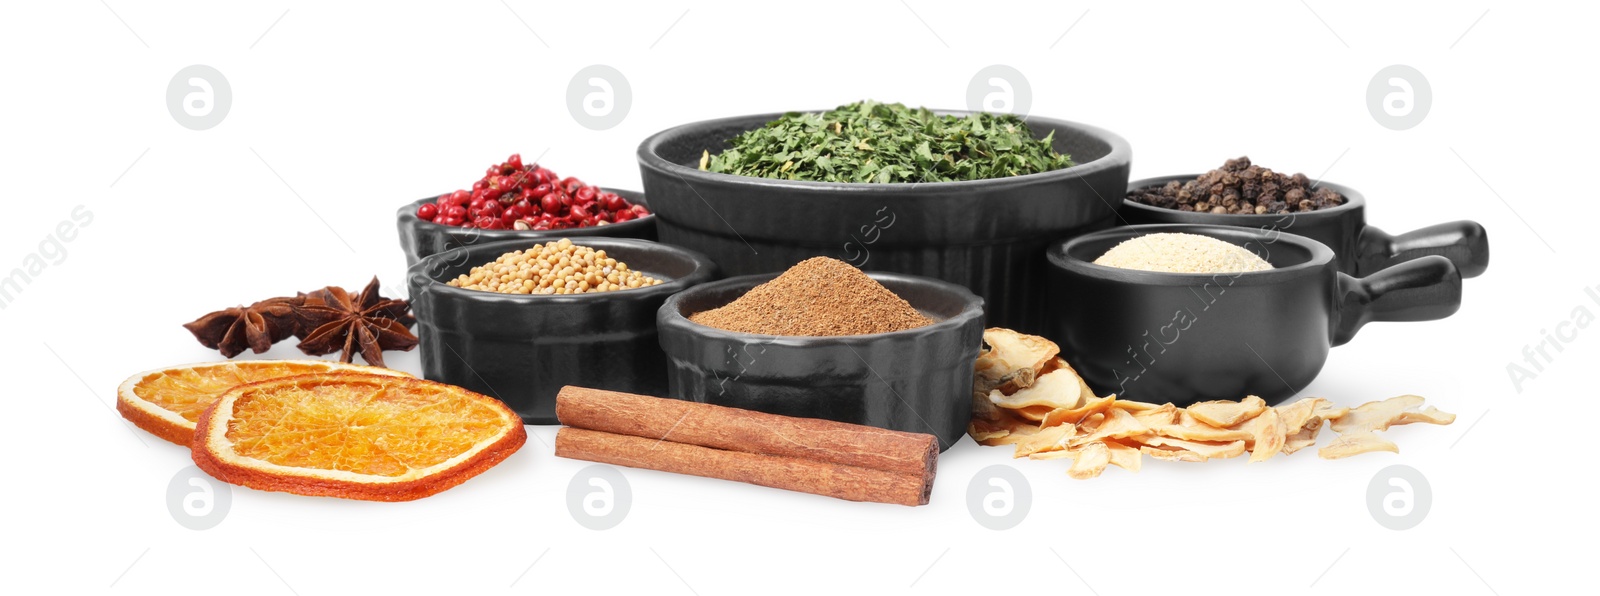 Photo of Bowls with different spices on white background